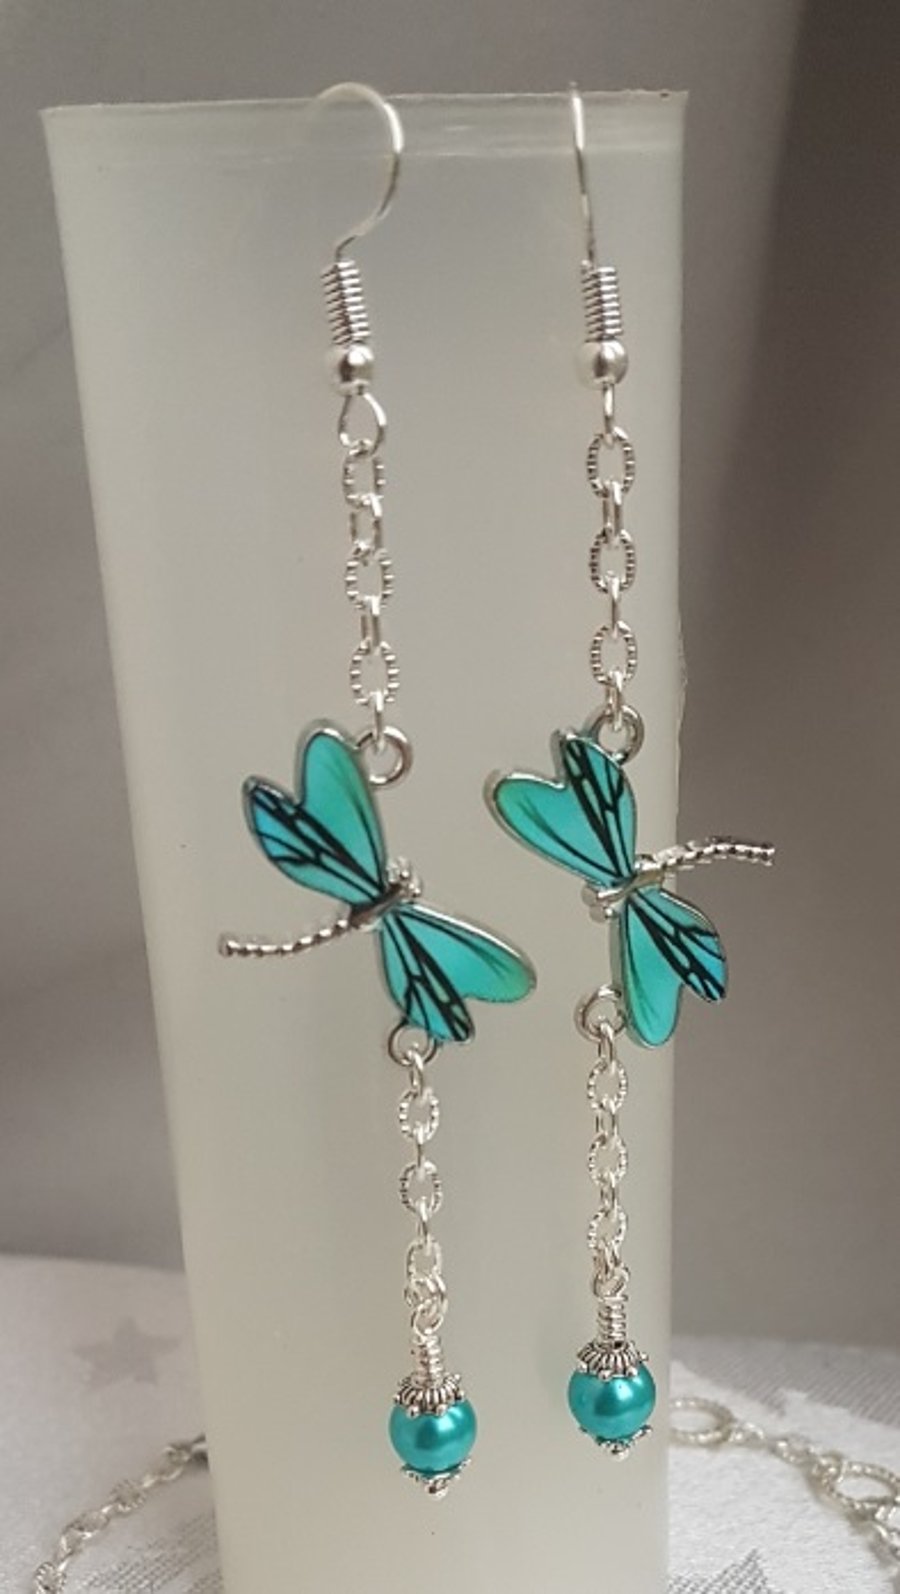 Gorgeous Dangly Dragonfly Earrings - Silver Tones